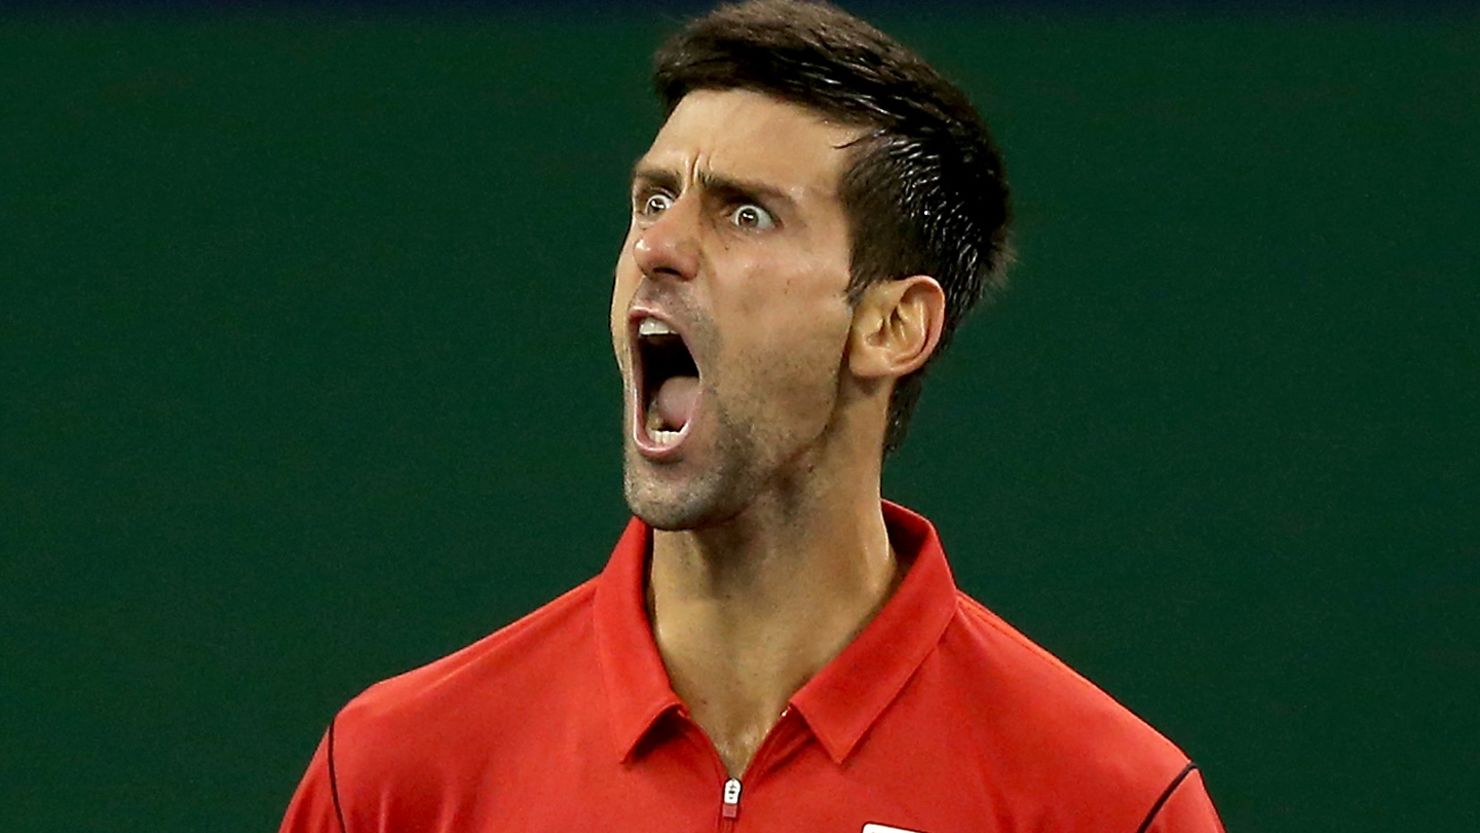 Novak Djokovic strikes a typical pose after closing out Gael Monfils in their Shanghai Masters quarterfinal.